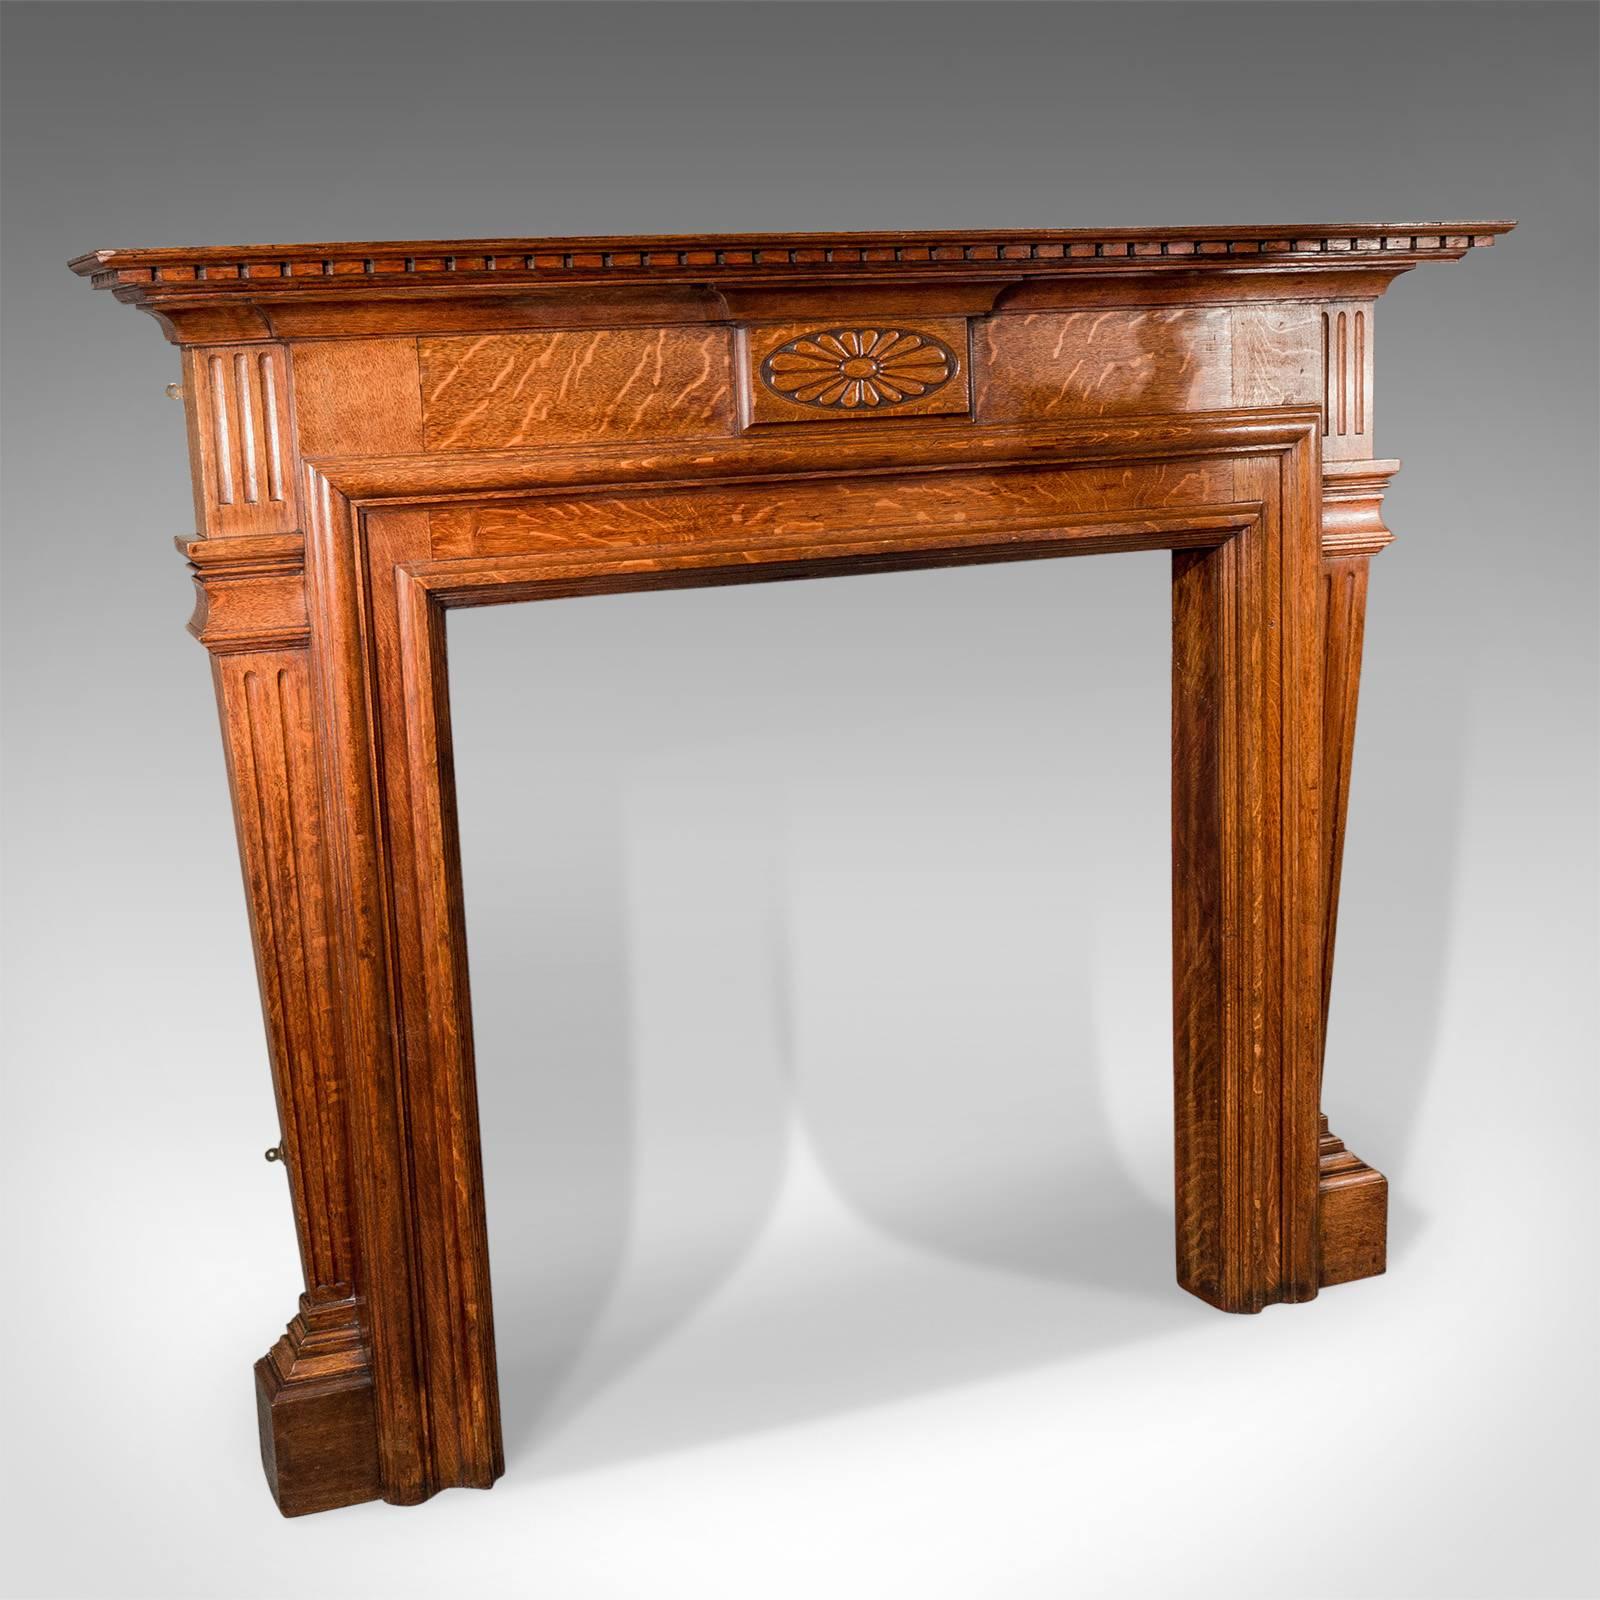 This is a large antique fireplace, an Edwardian mantelpiece fire surround in oak. English circa 1910.

English oak with fine colour throughout
Timber displaying desirable medullary rays 
Angled uprights flank to provide a pleasing architectural